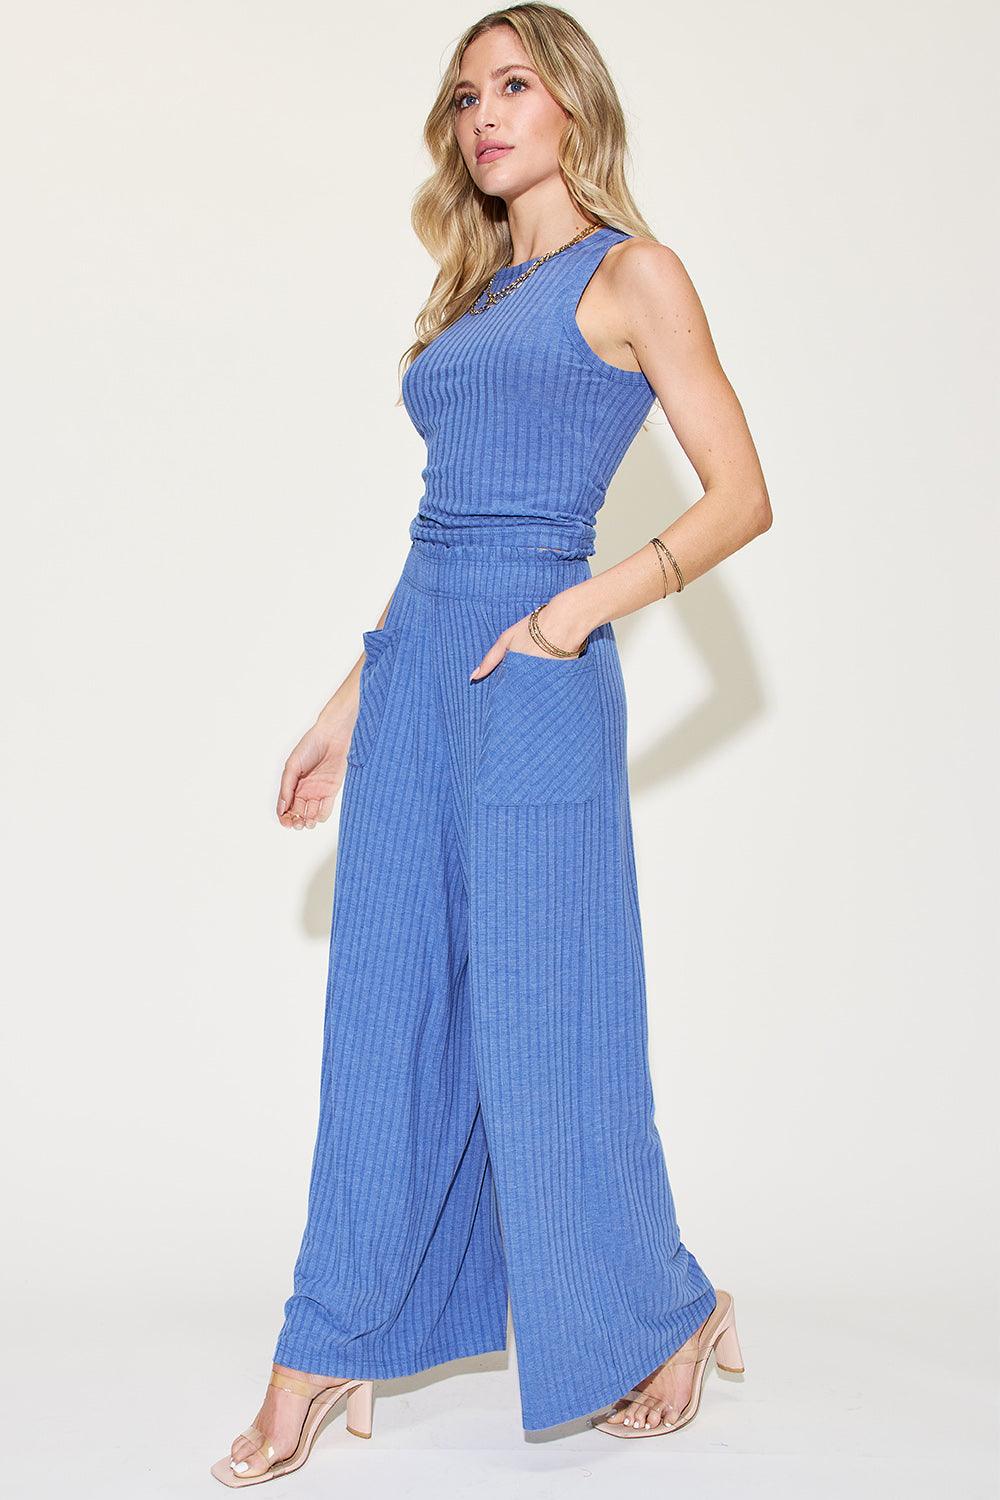 Ribbed Tank and Wide Leg Pants Set - Wildflower Hippies